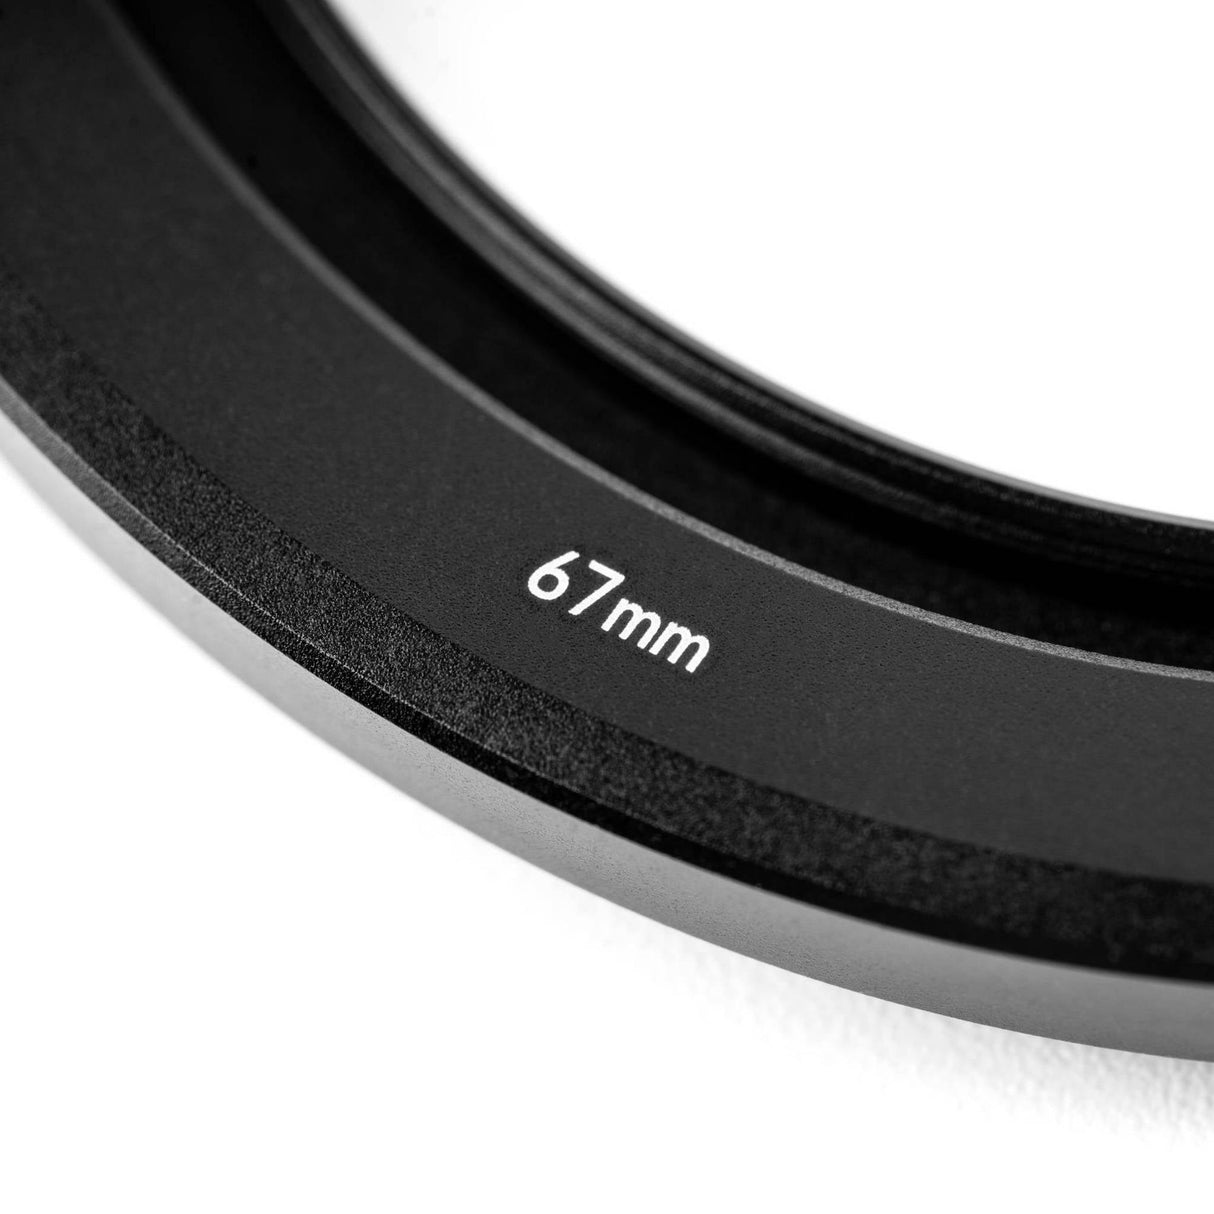 NiSi M75-II 75mm Professional Kit with True Color NC CPL